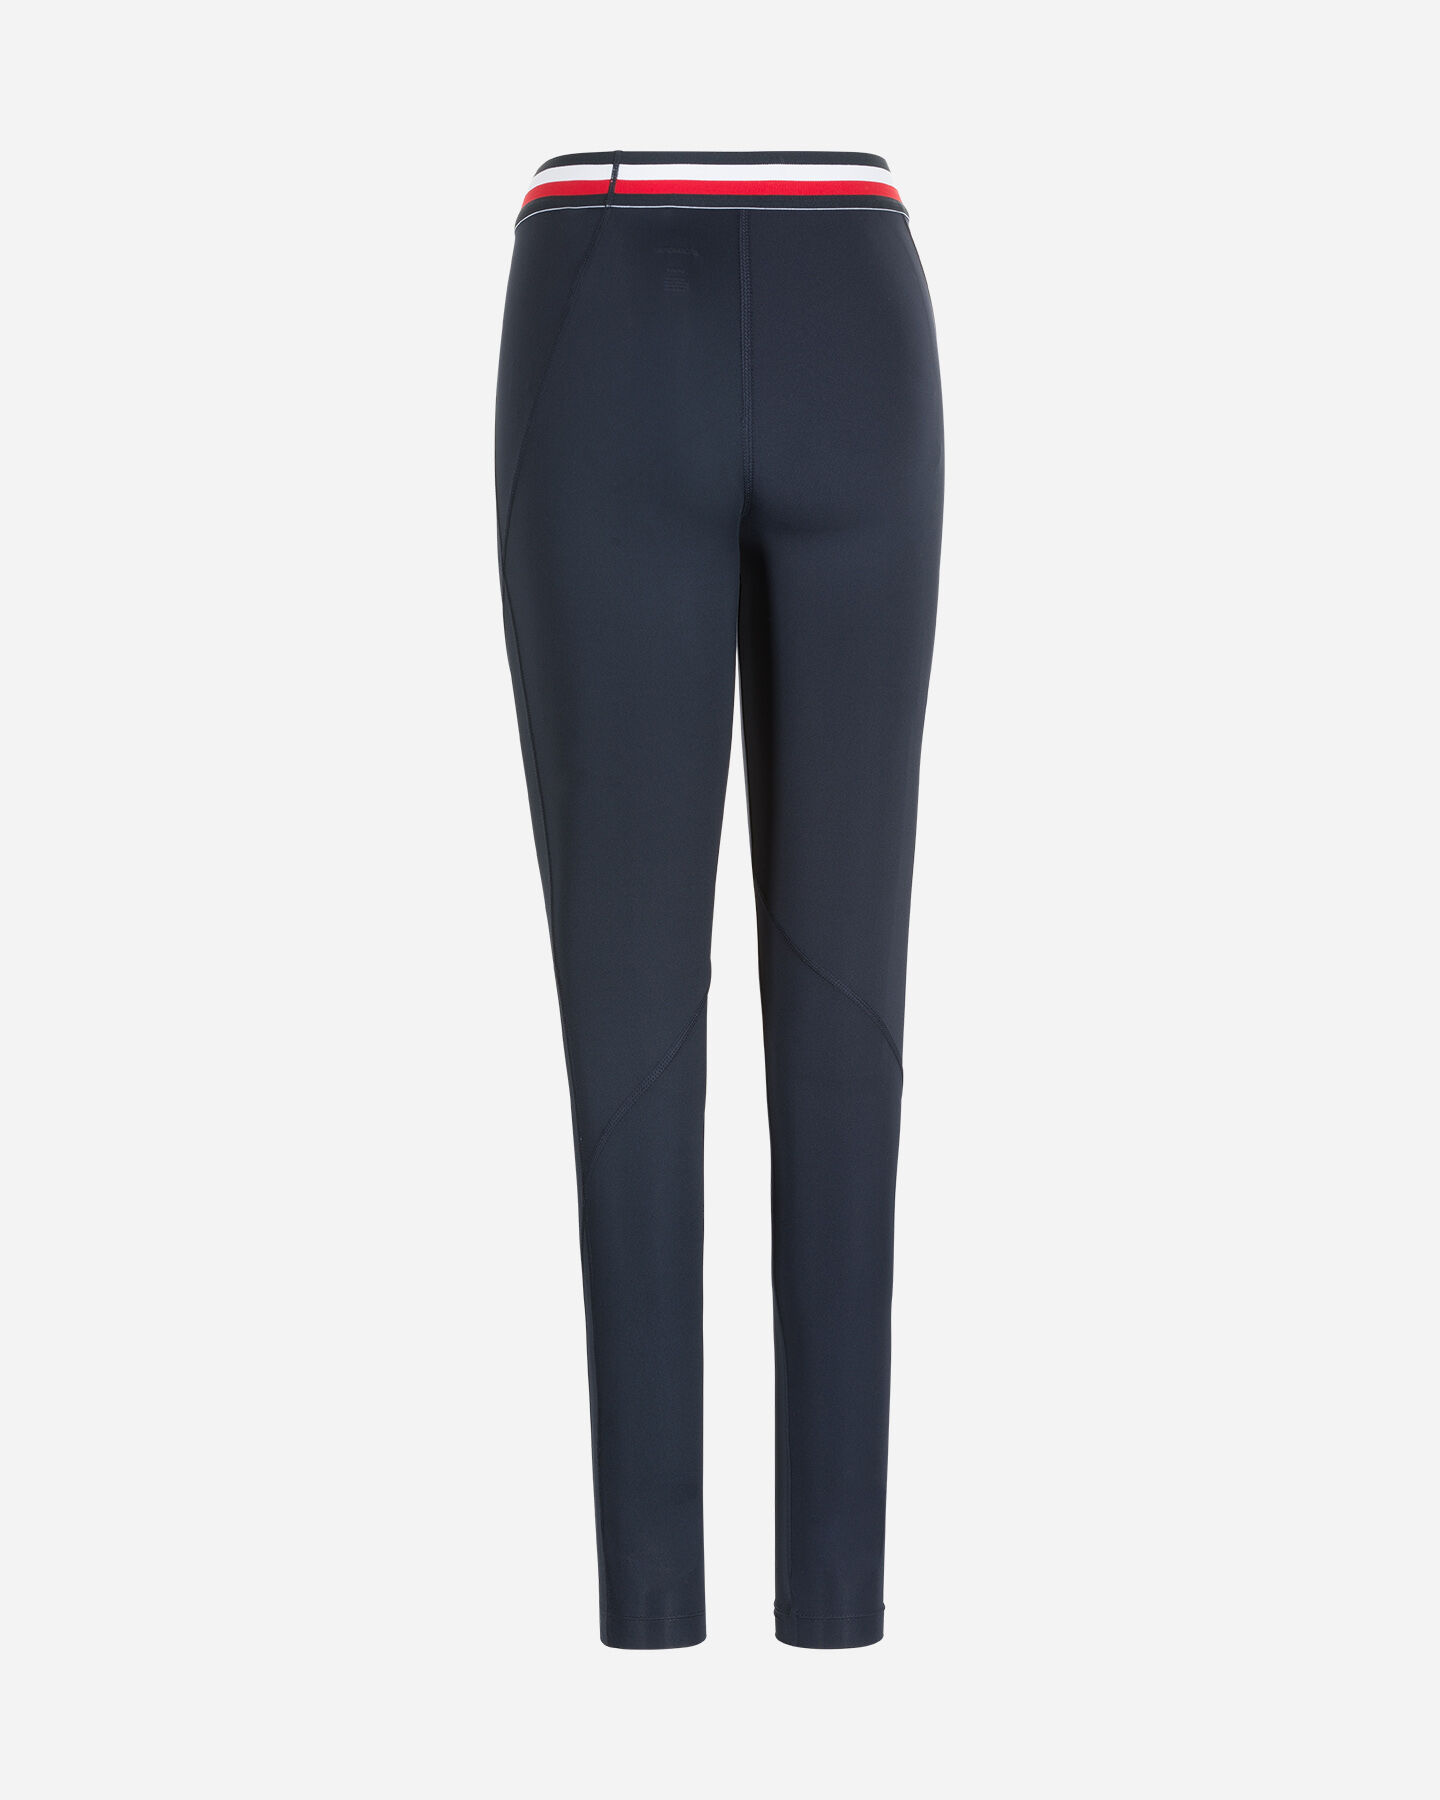  Leggings TOMMY HILFIGER POLY W S4082509|DW5|XS scatto 1